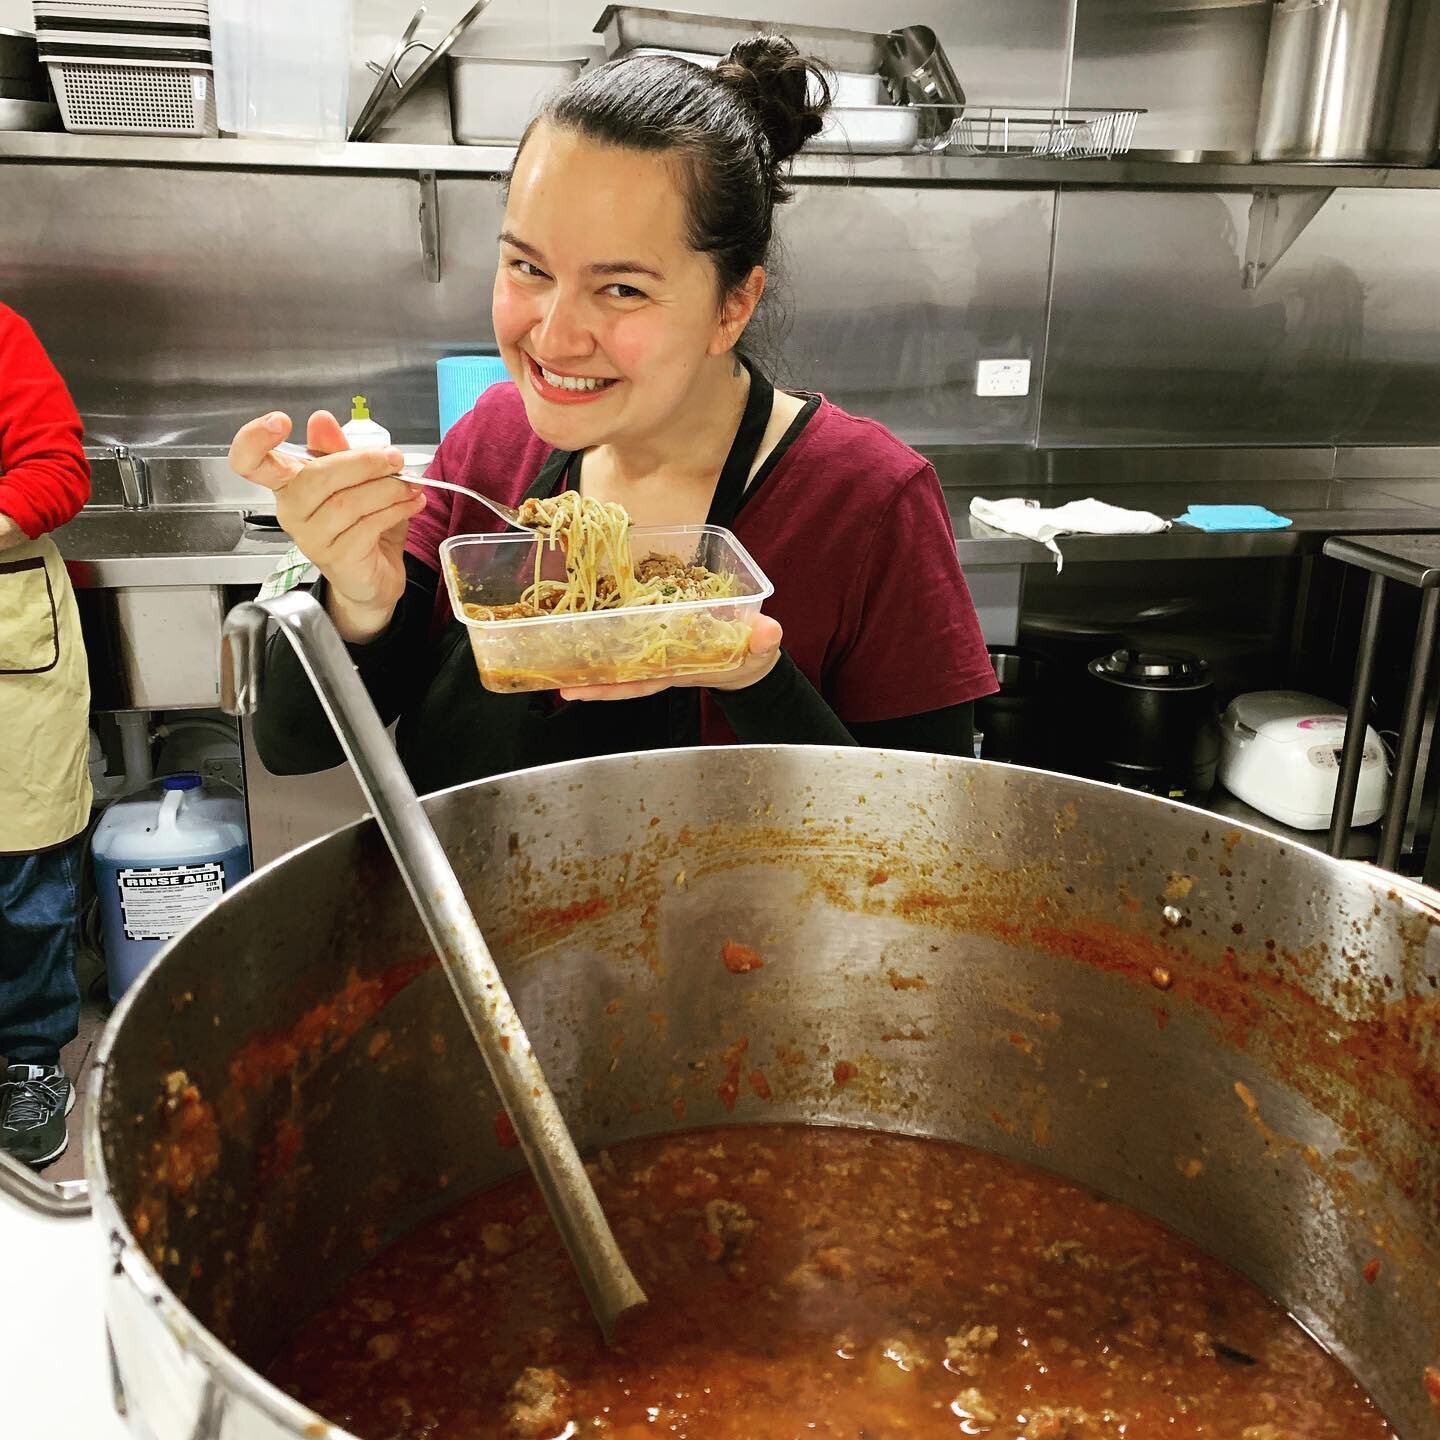 Celebrating World Food Day today with Brazilian chef Maria Penido and our wonderful team of volunteers cooking over 160 serves of spaghetti bolognese to give to Melbournians in need. Thank- you team for giving up your Saturday today! 
#worldfoodday
#